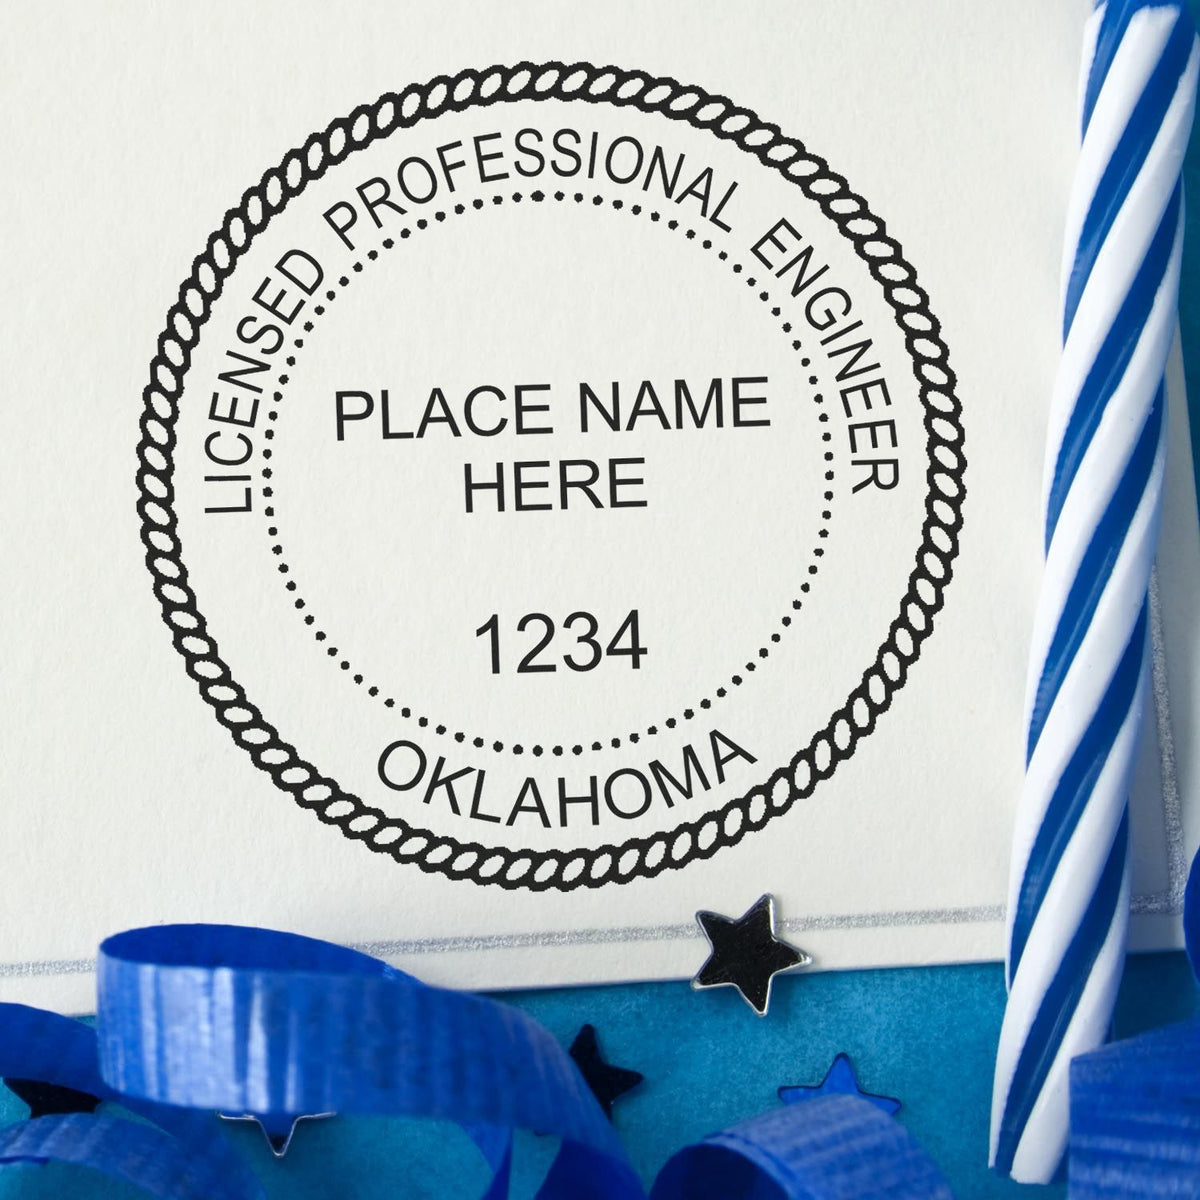 A stamped impression of the Digital Oklahoma PE Stamp and Electronic Seal for Oklahoma Engineer in this stylish lifestyle photo, setting the tone for a unique and personalized product.